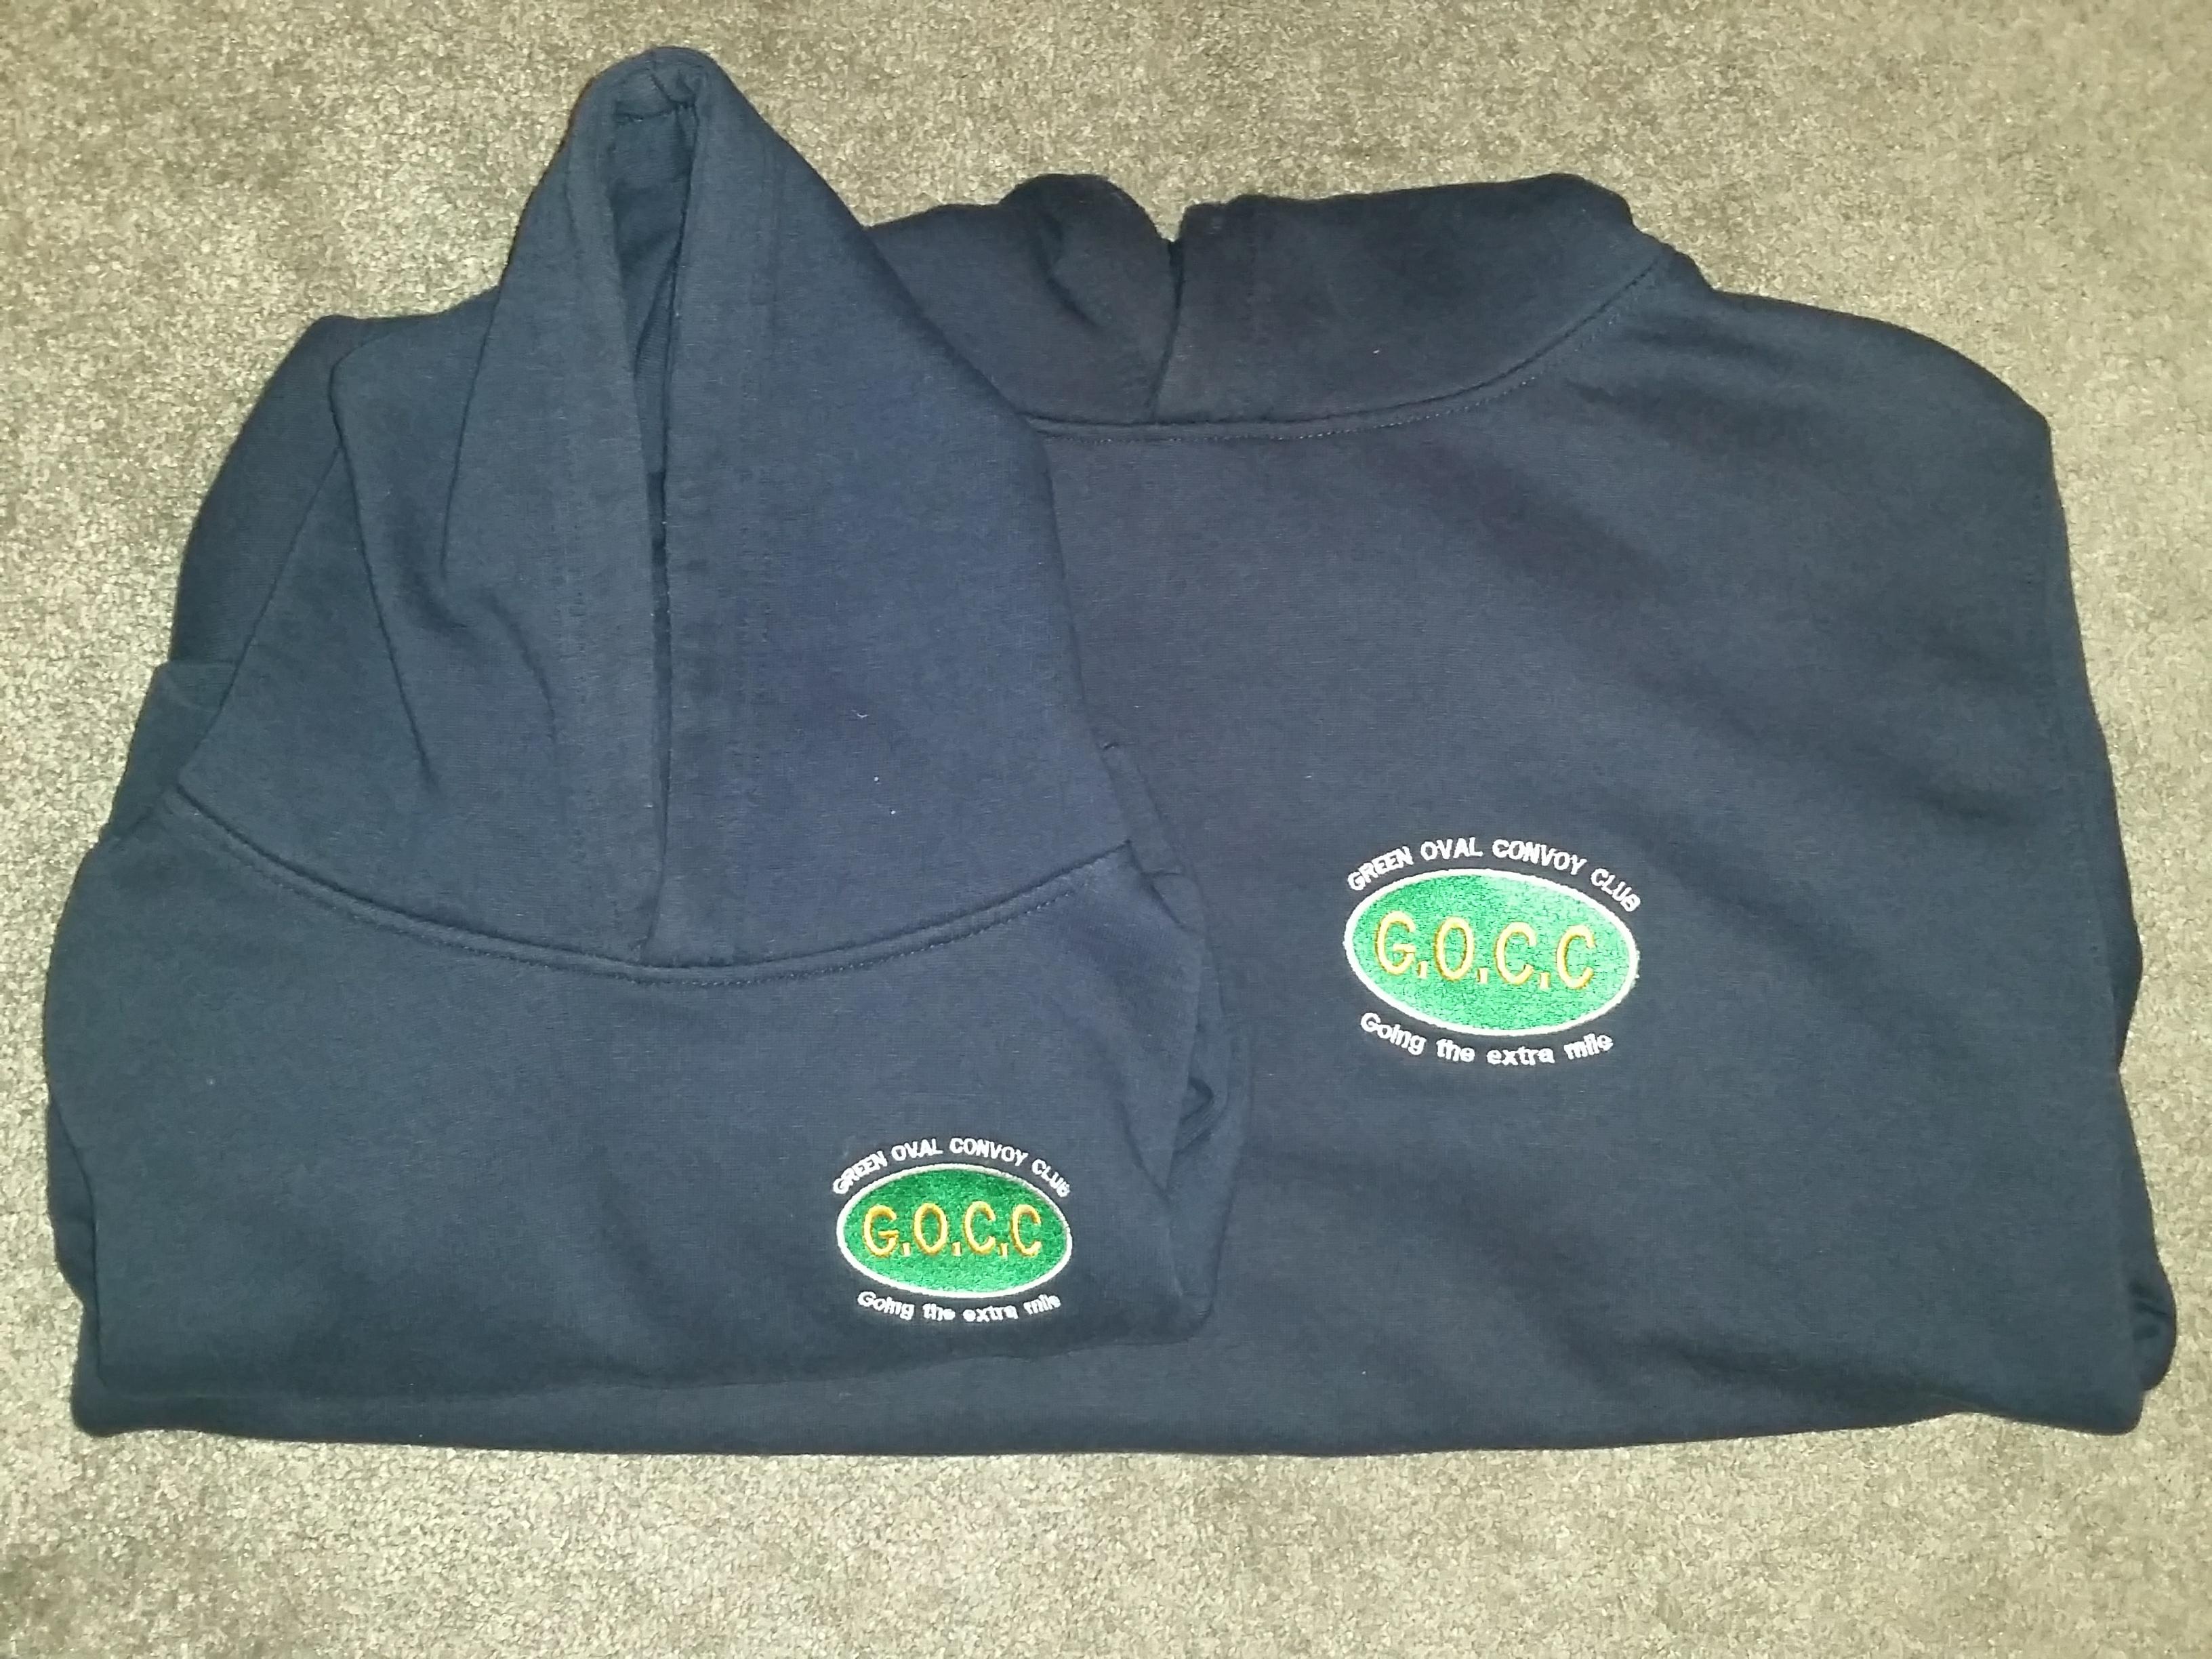 Embroidered G.O.C.C. Hoodies – Green Oval Convoy Club